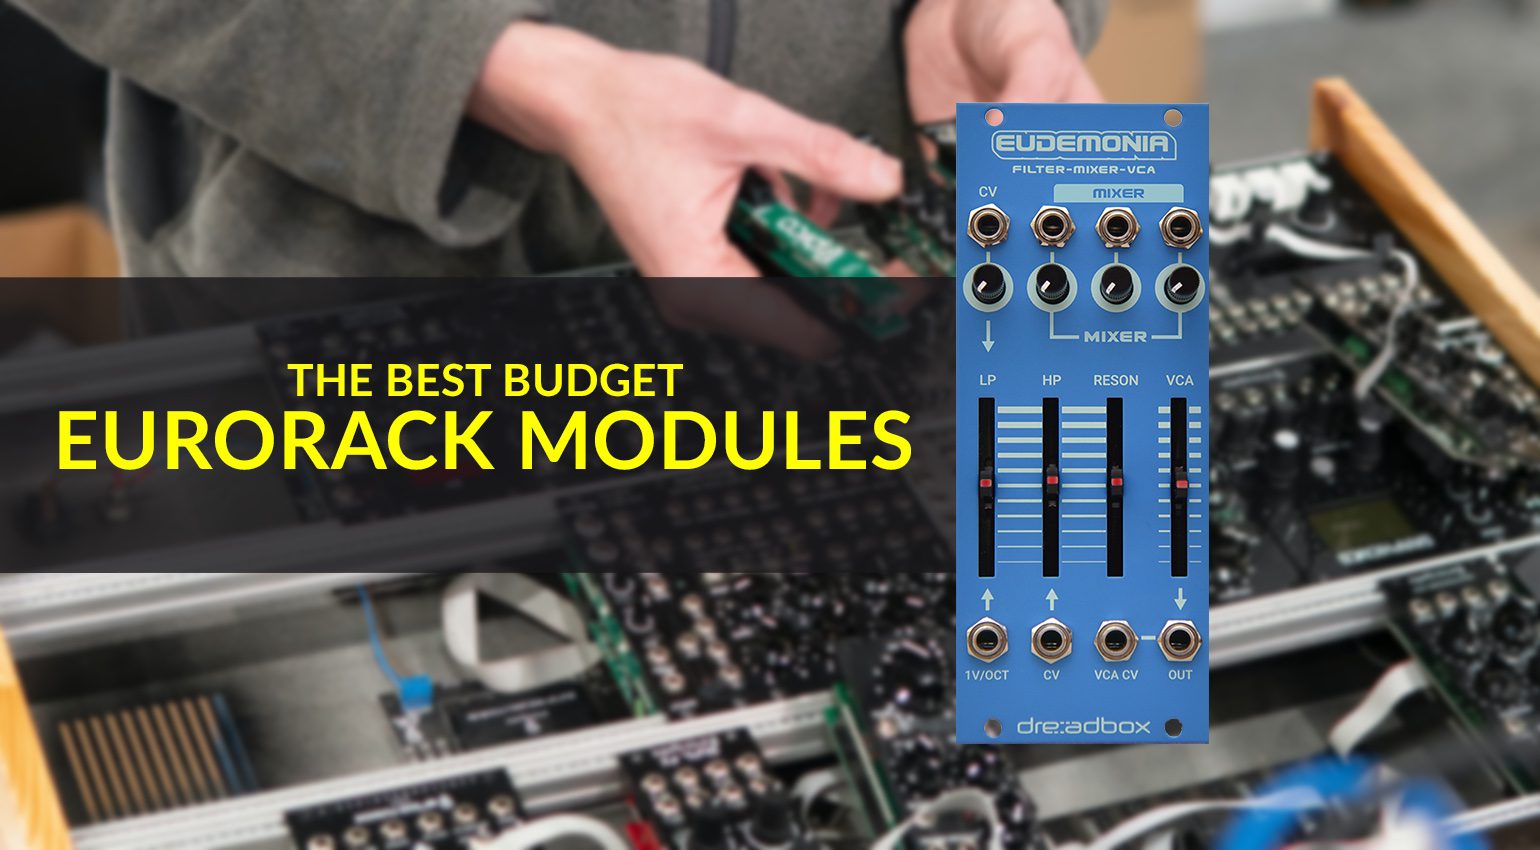 The Best Budget Eurorack Modules: Building synths from scratch